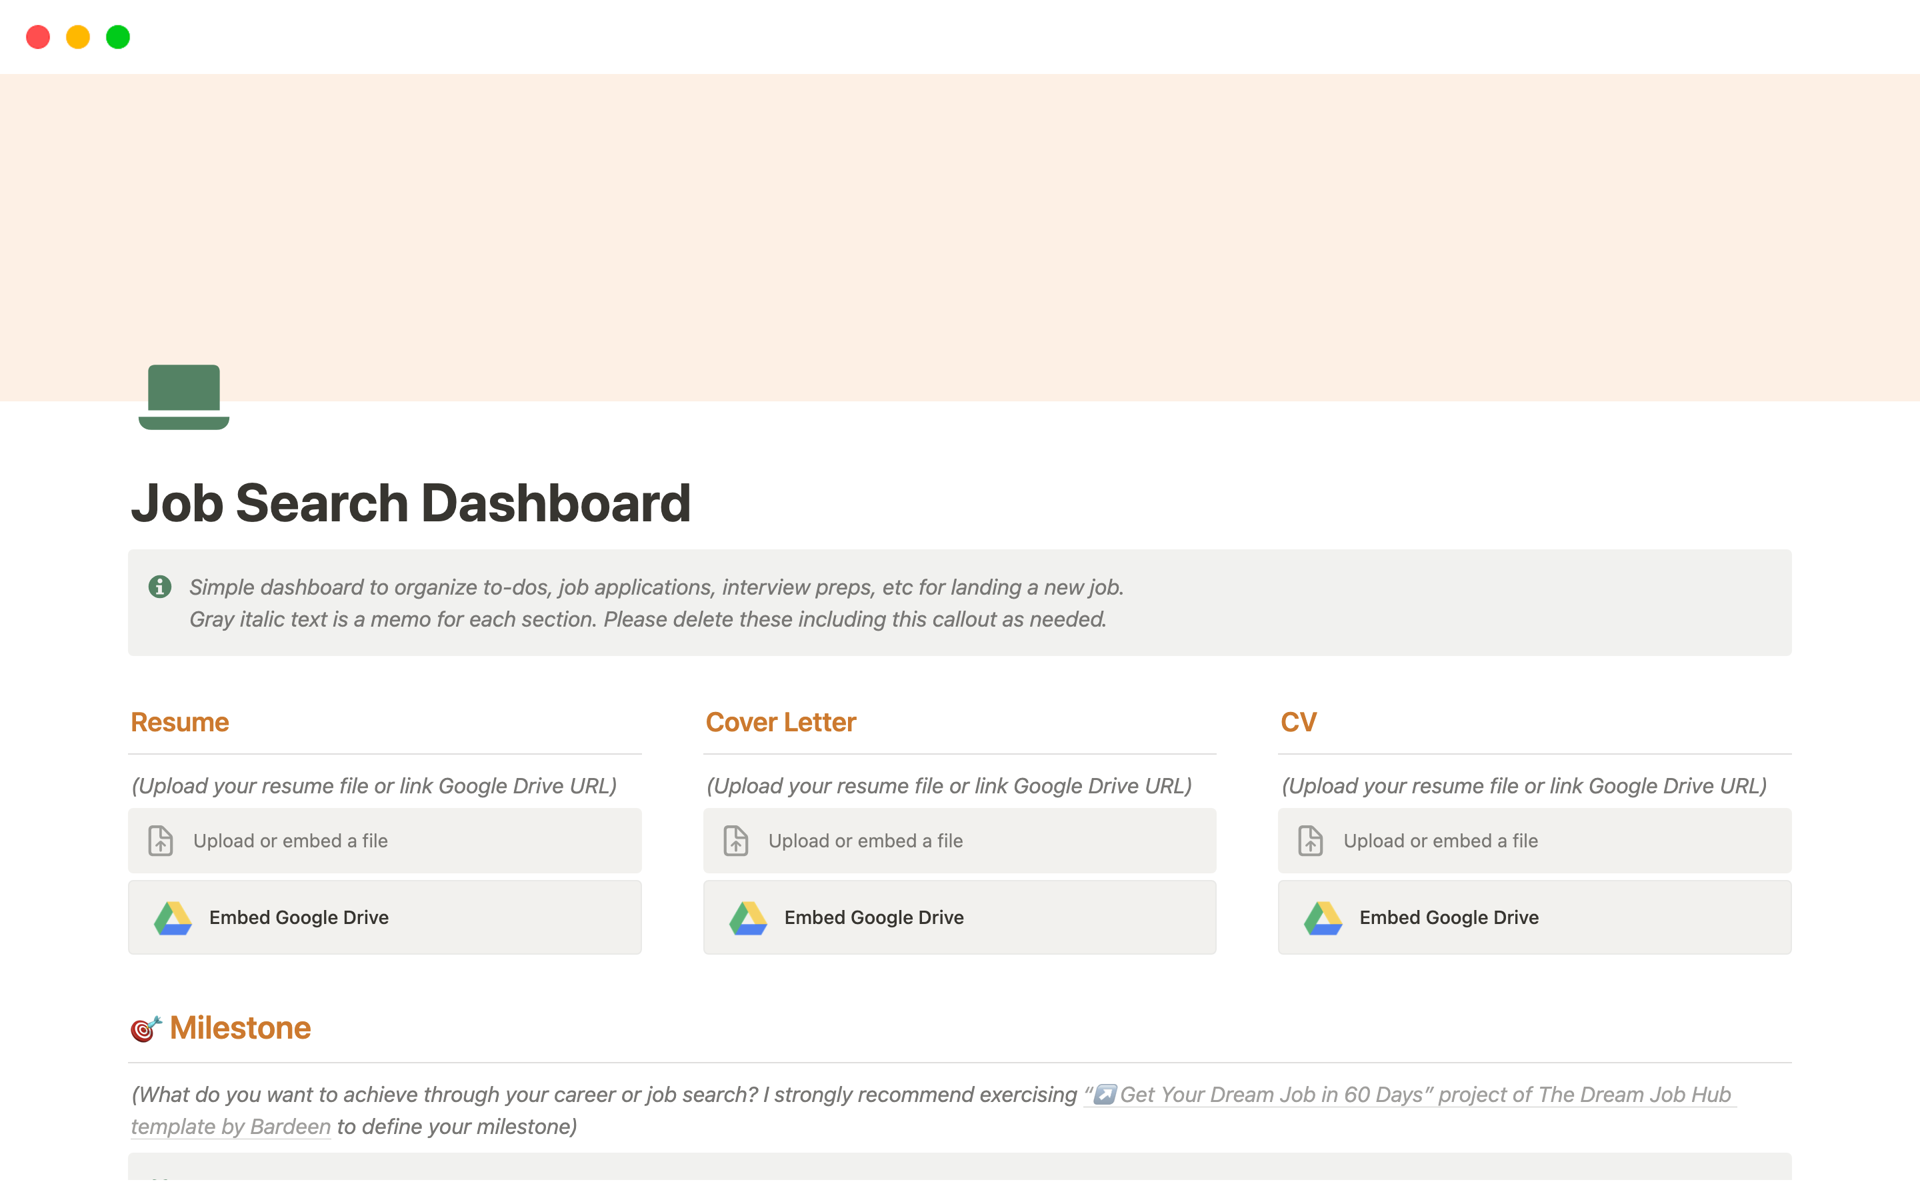 Simple dashboard to organize to-dos, job applications, interview preps, etc for landing a new job.